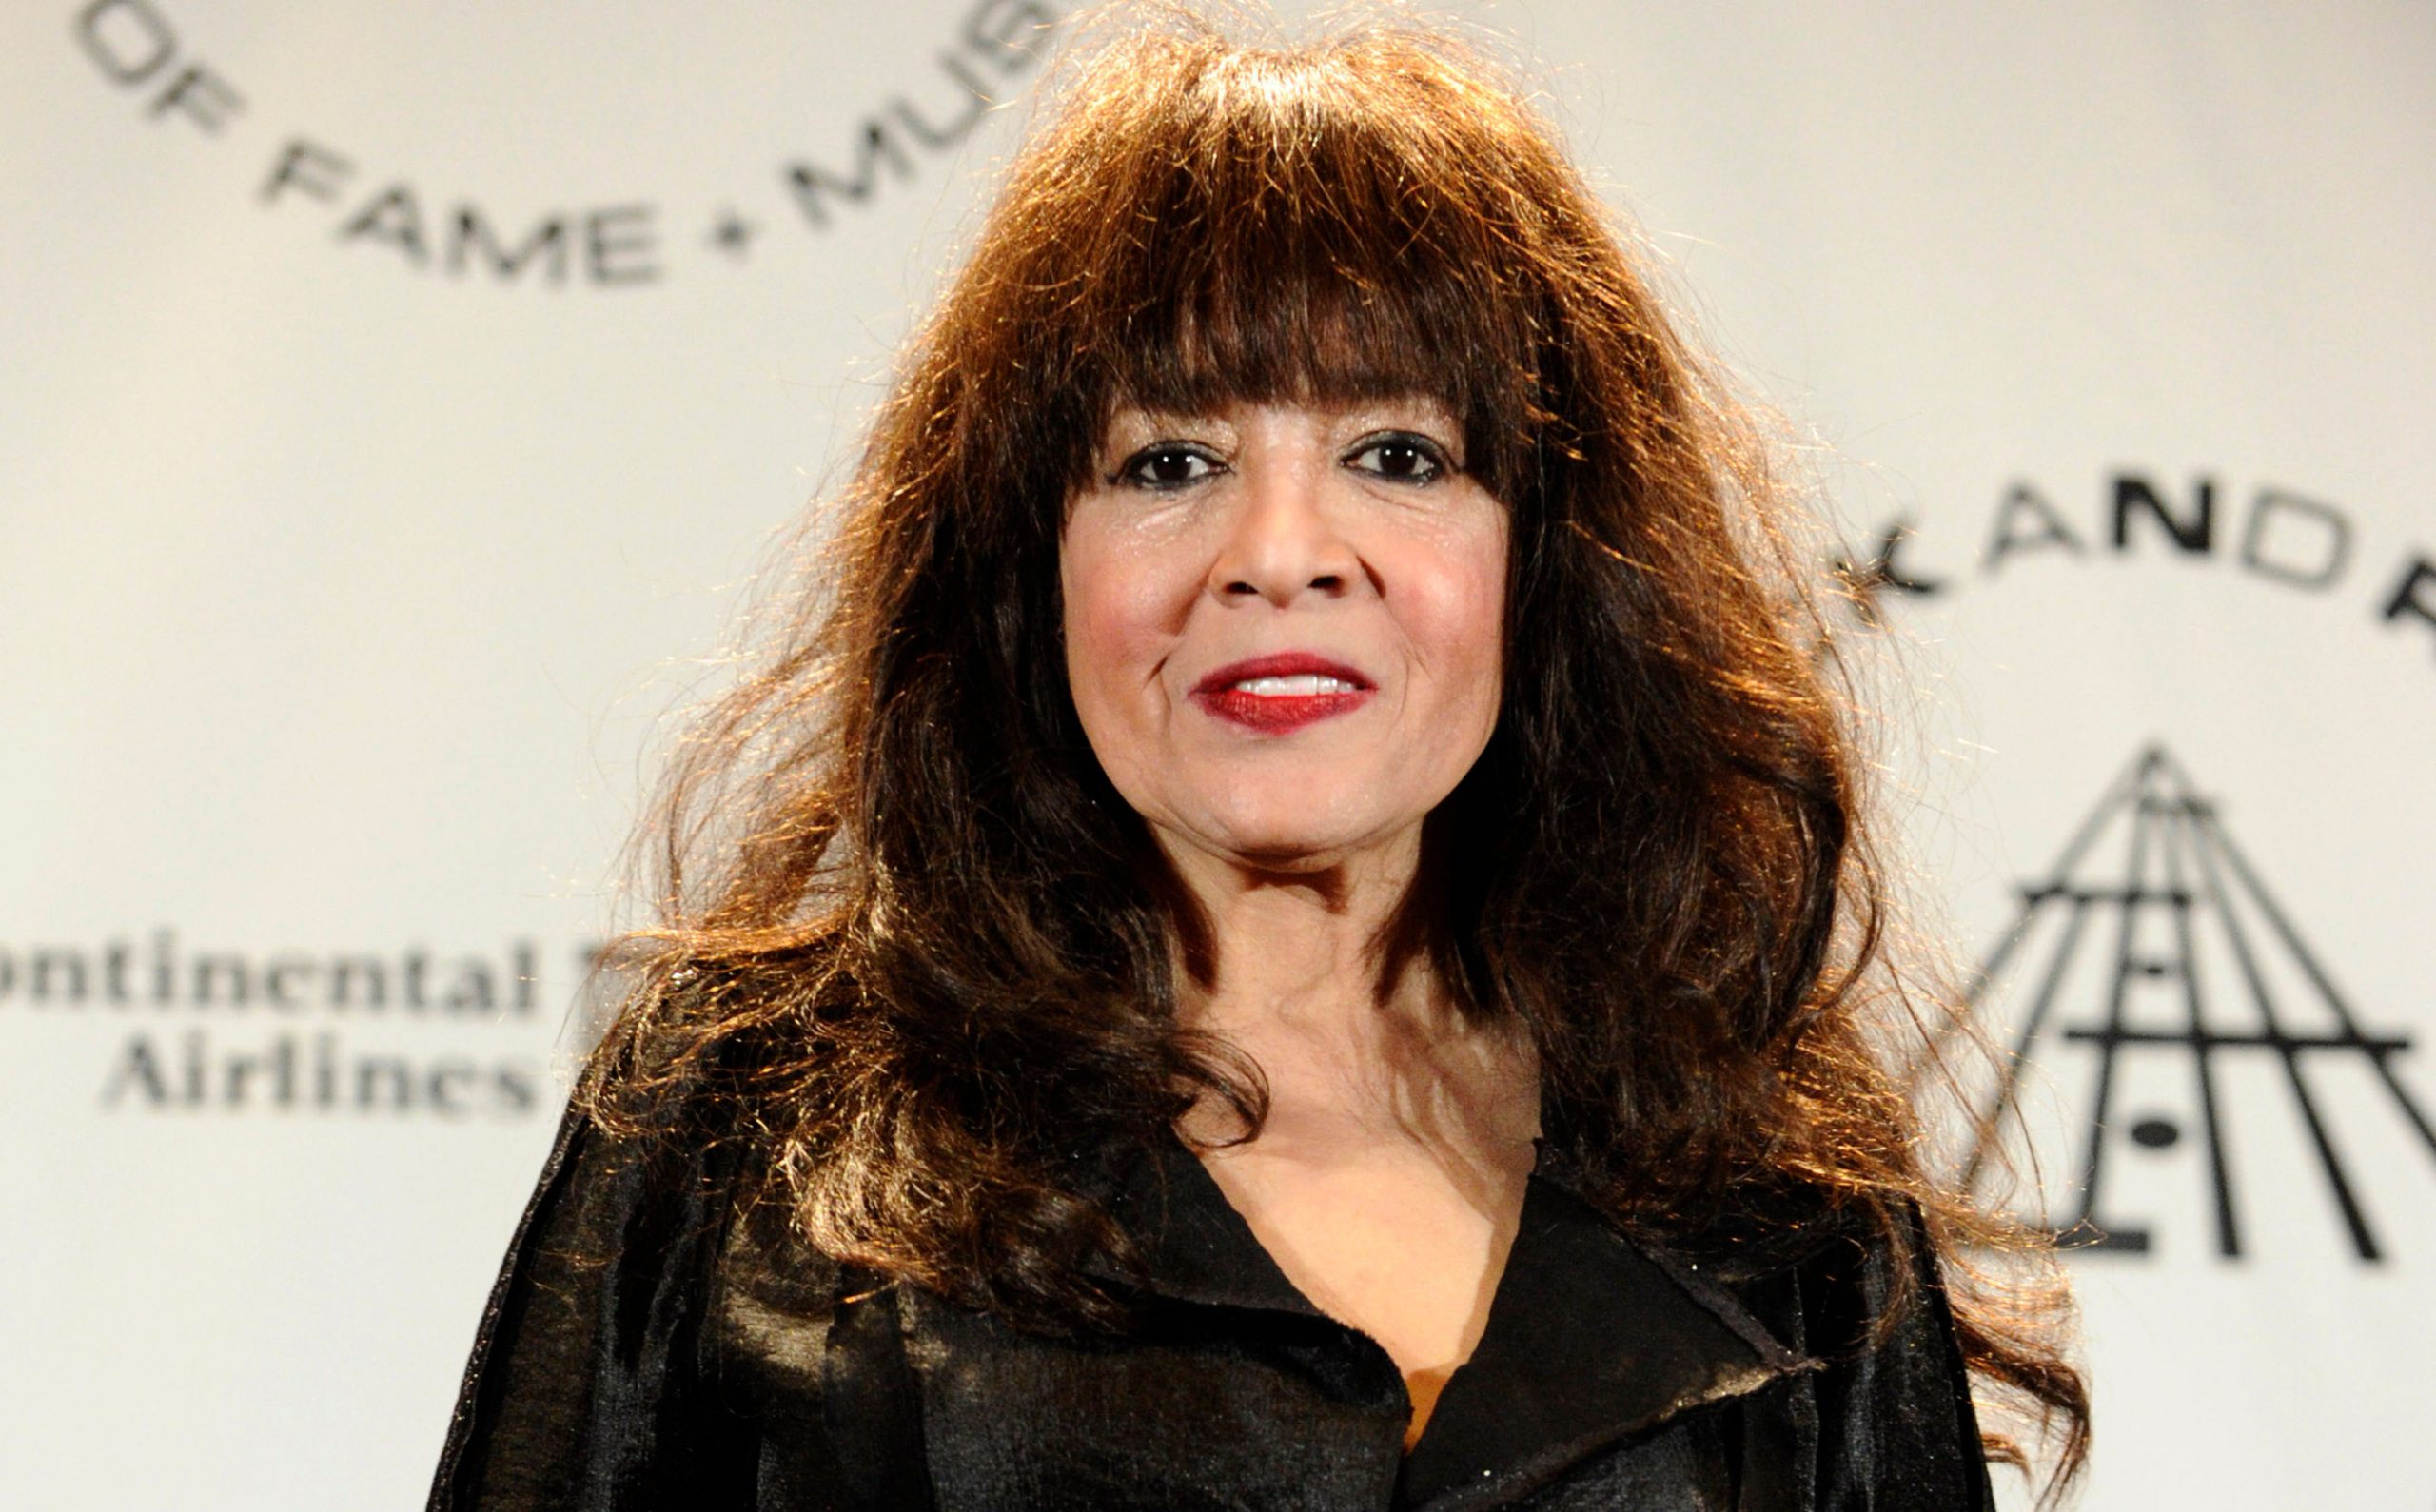 Who was Ronnie Spector?